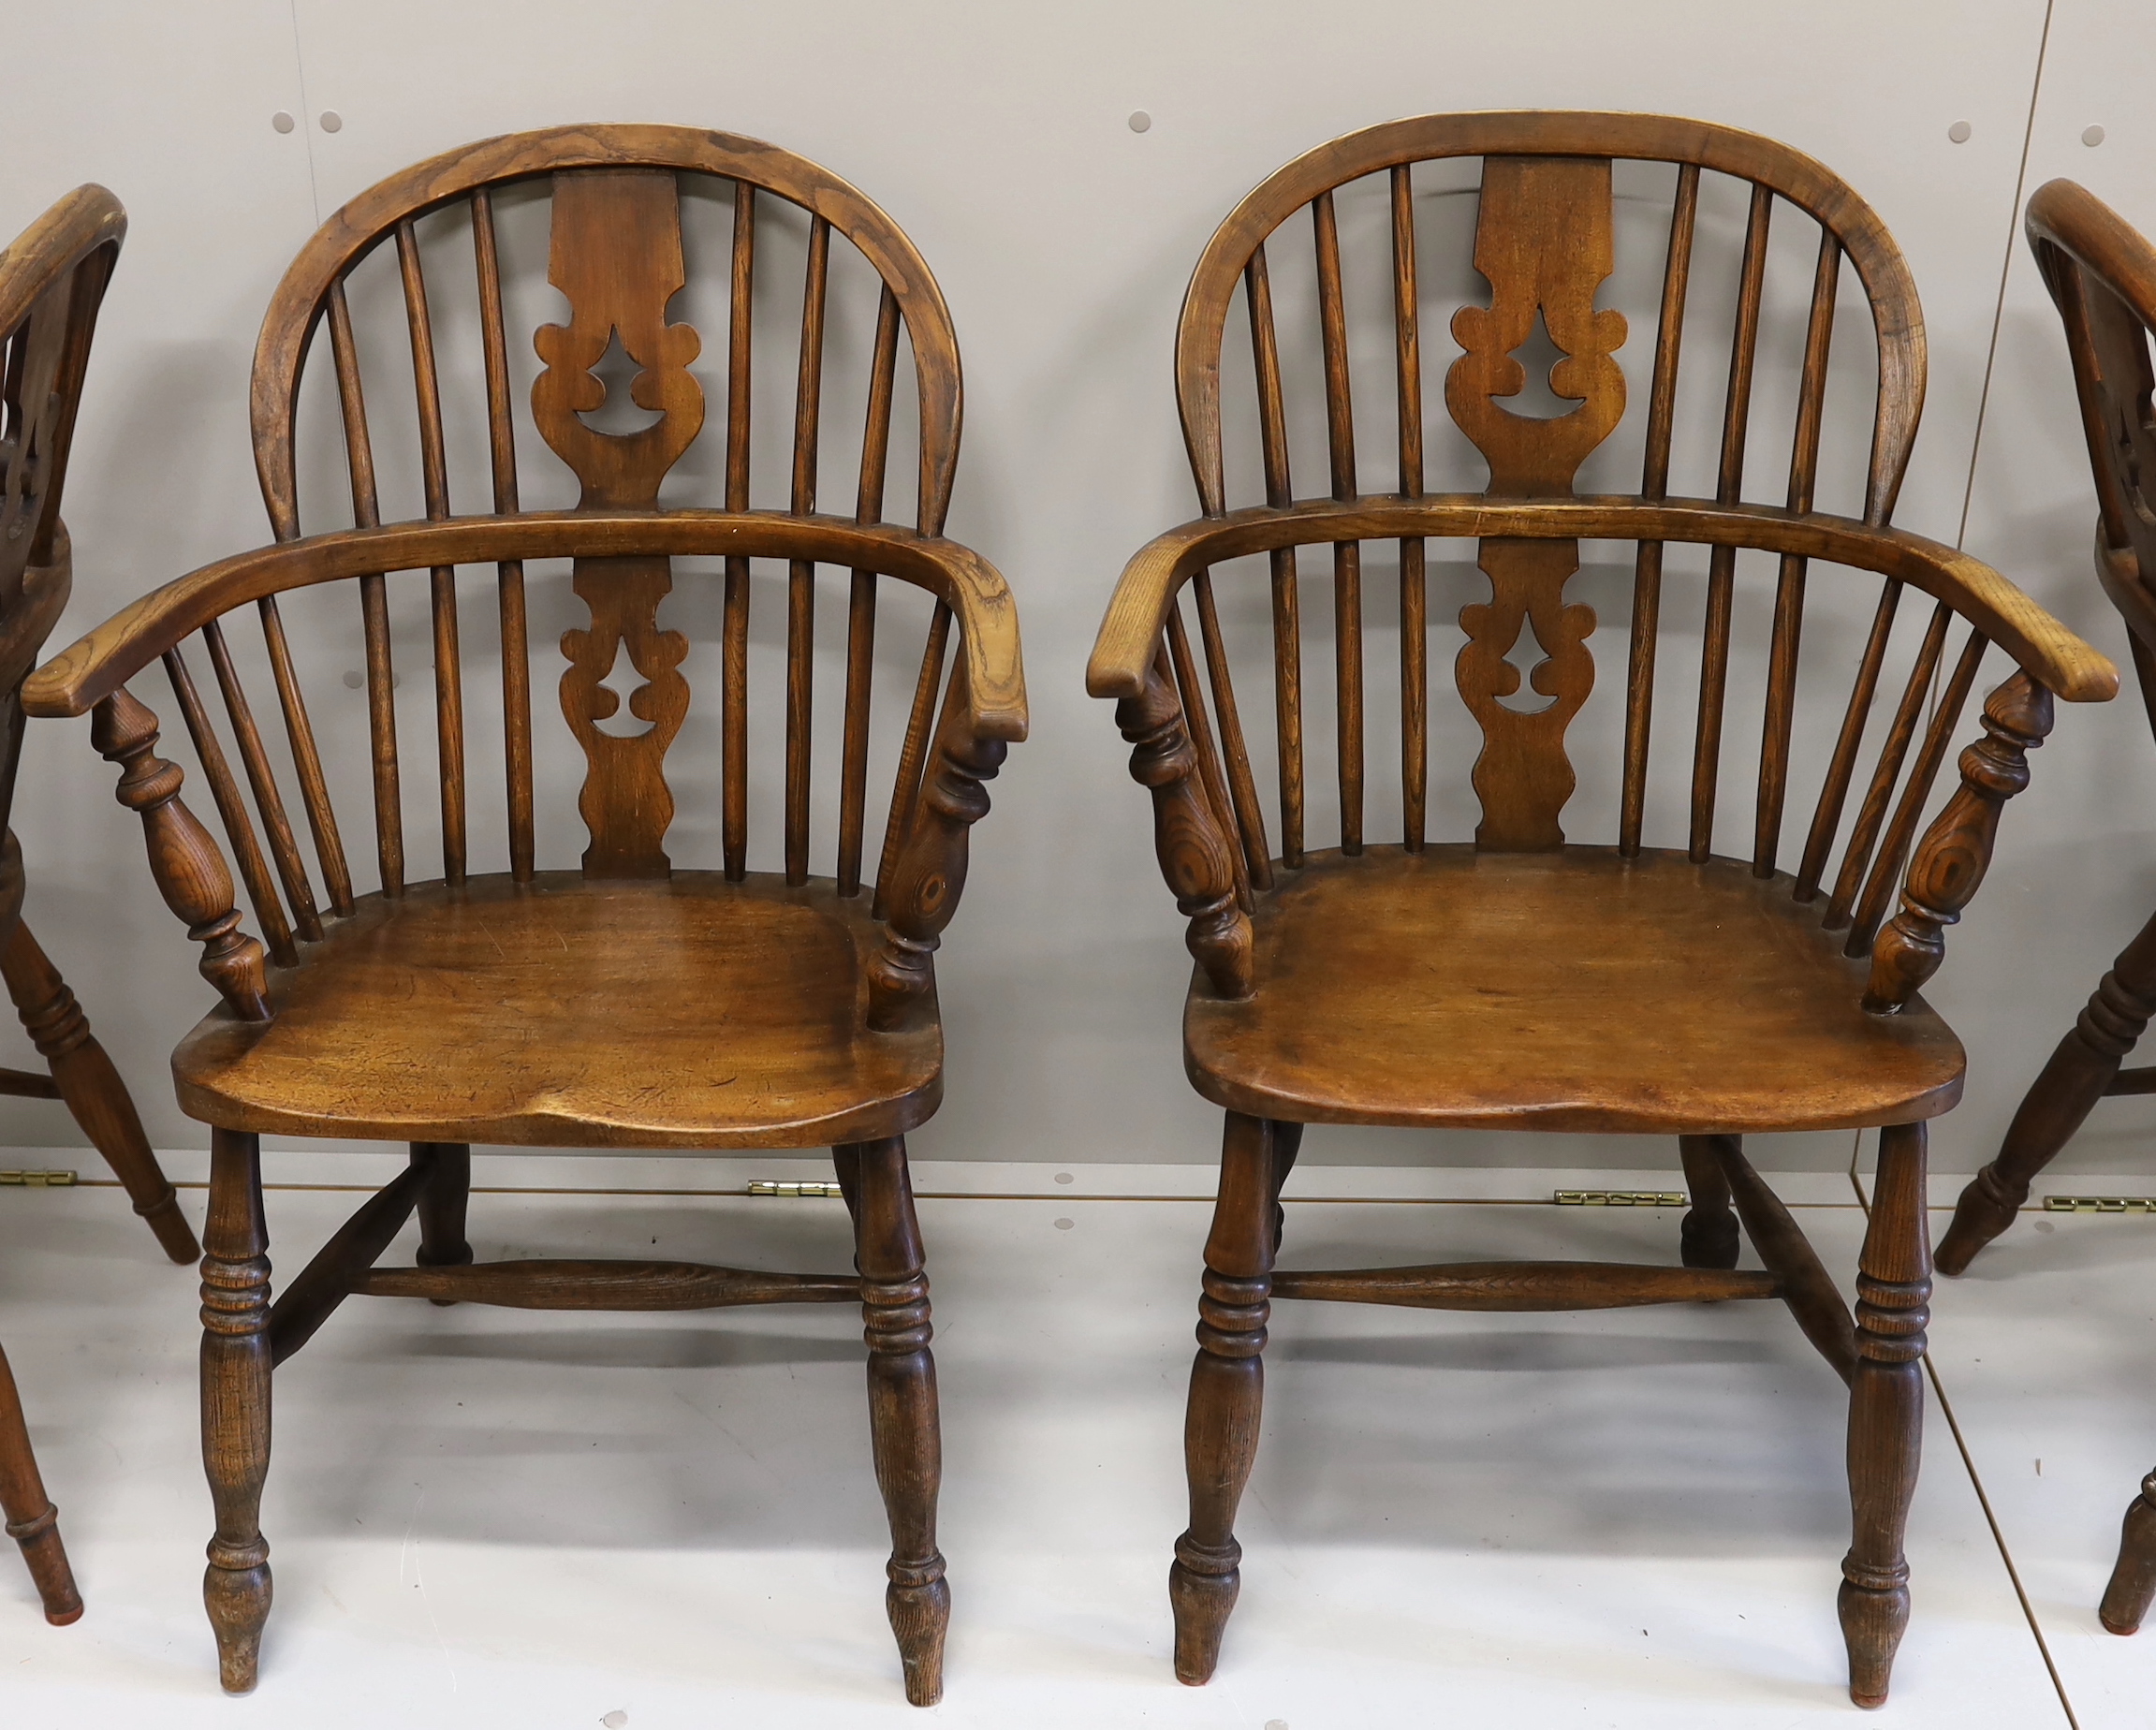 A near set of four 19th century Nottingham area elm, ash and beech Windsor elbow chairs, possibly by Allsop & Son, width 58cm, depth 39cm, height 94cm